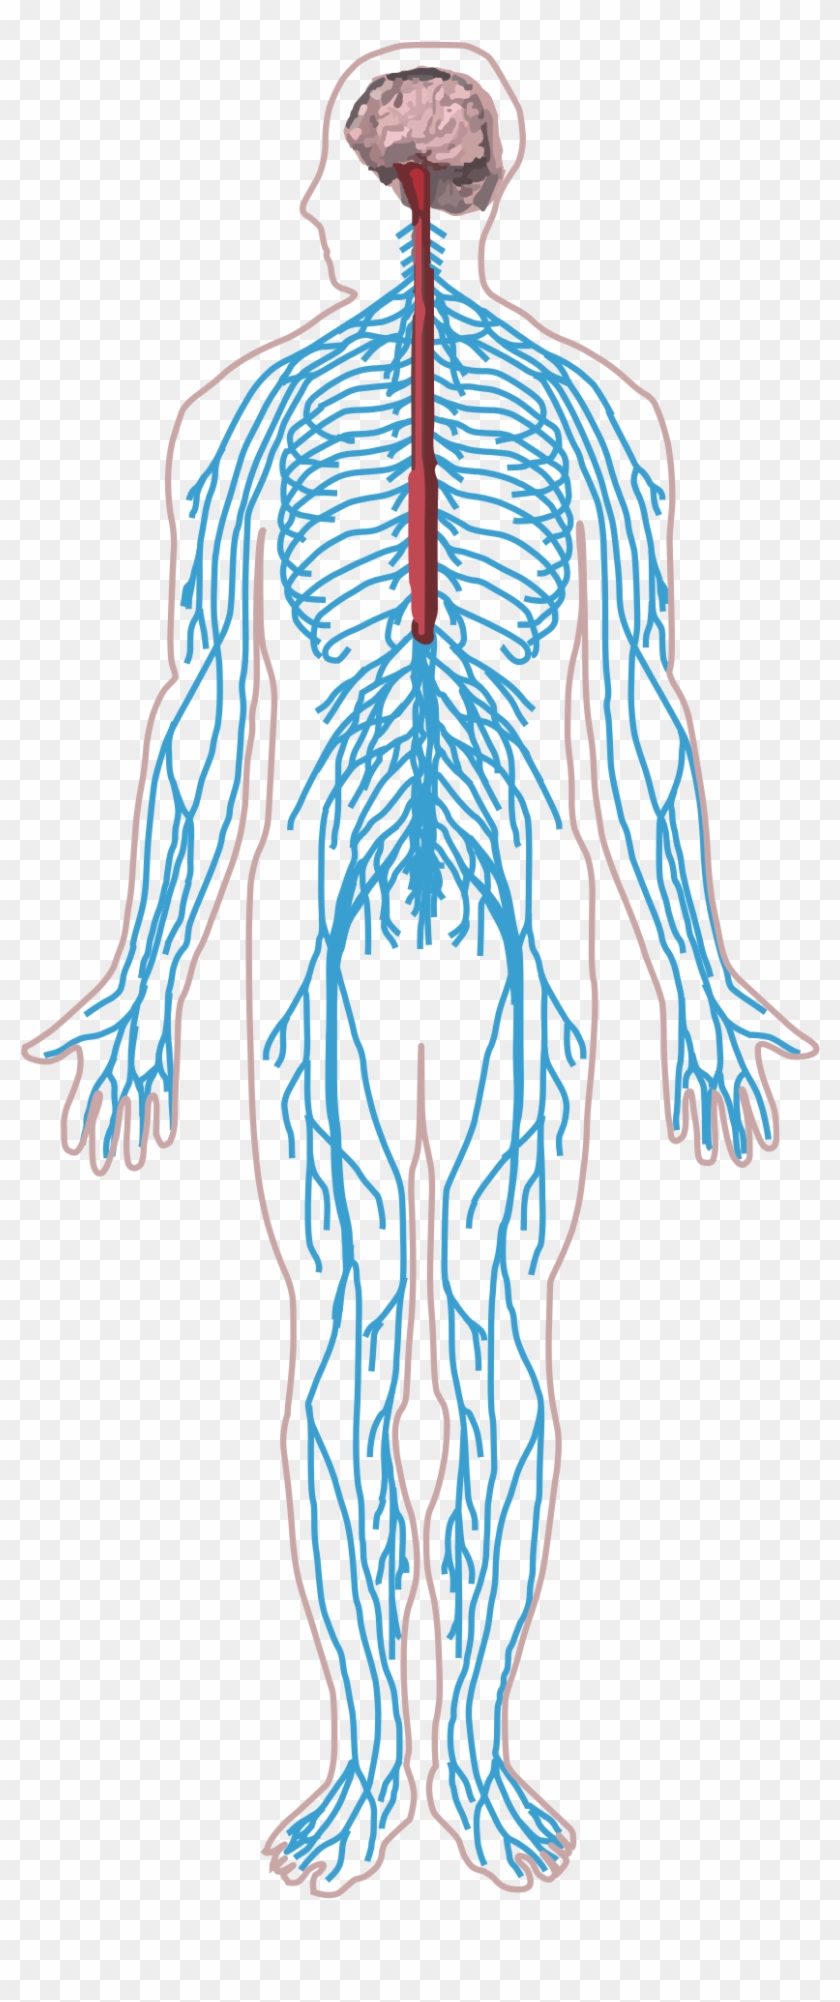 Peripheral Nervous System Png - Free Transparent PNG Clipart Images Download